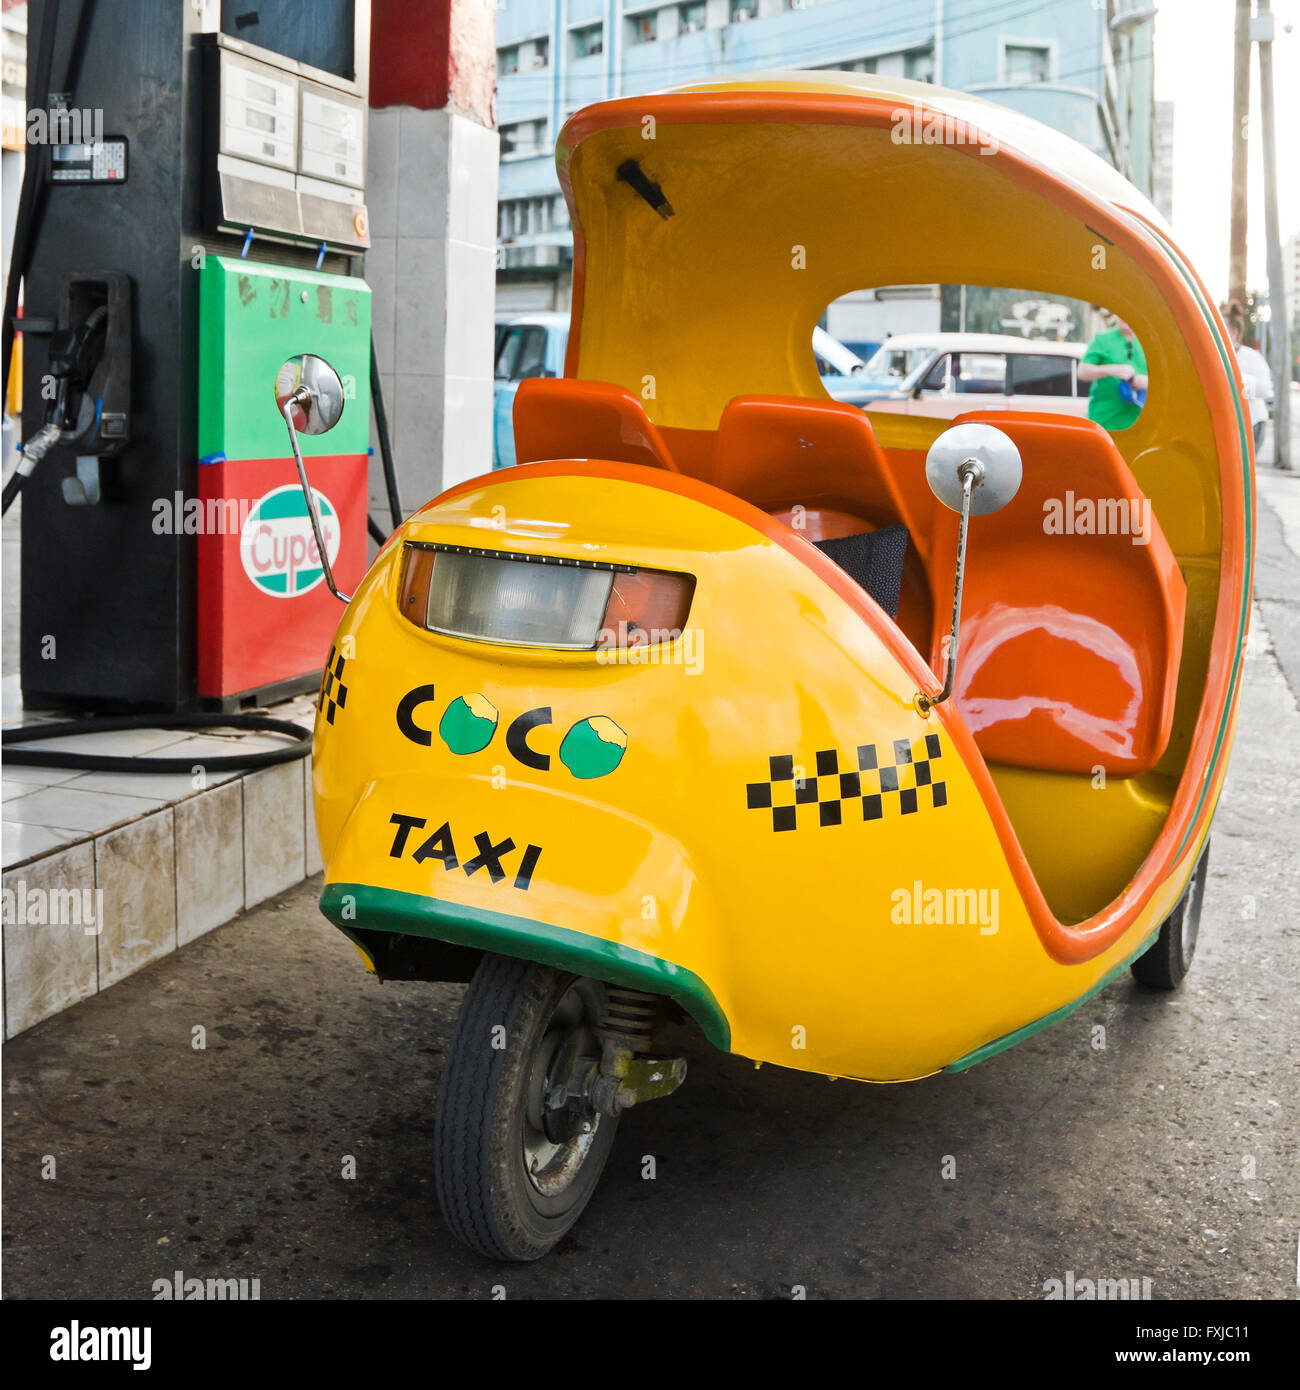 Square view of a coco taxi on a petrol station forecourt in Havana, Cuba. Stock Photo